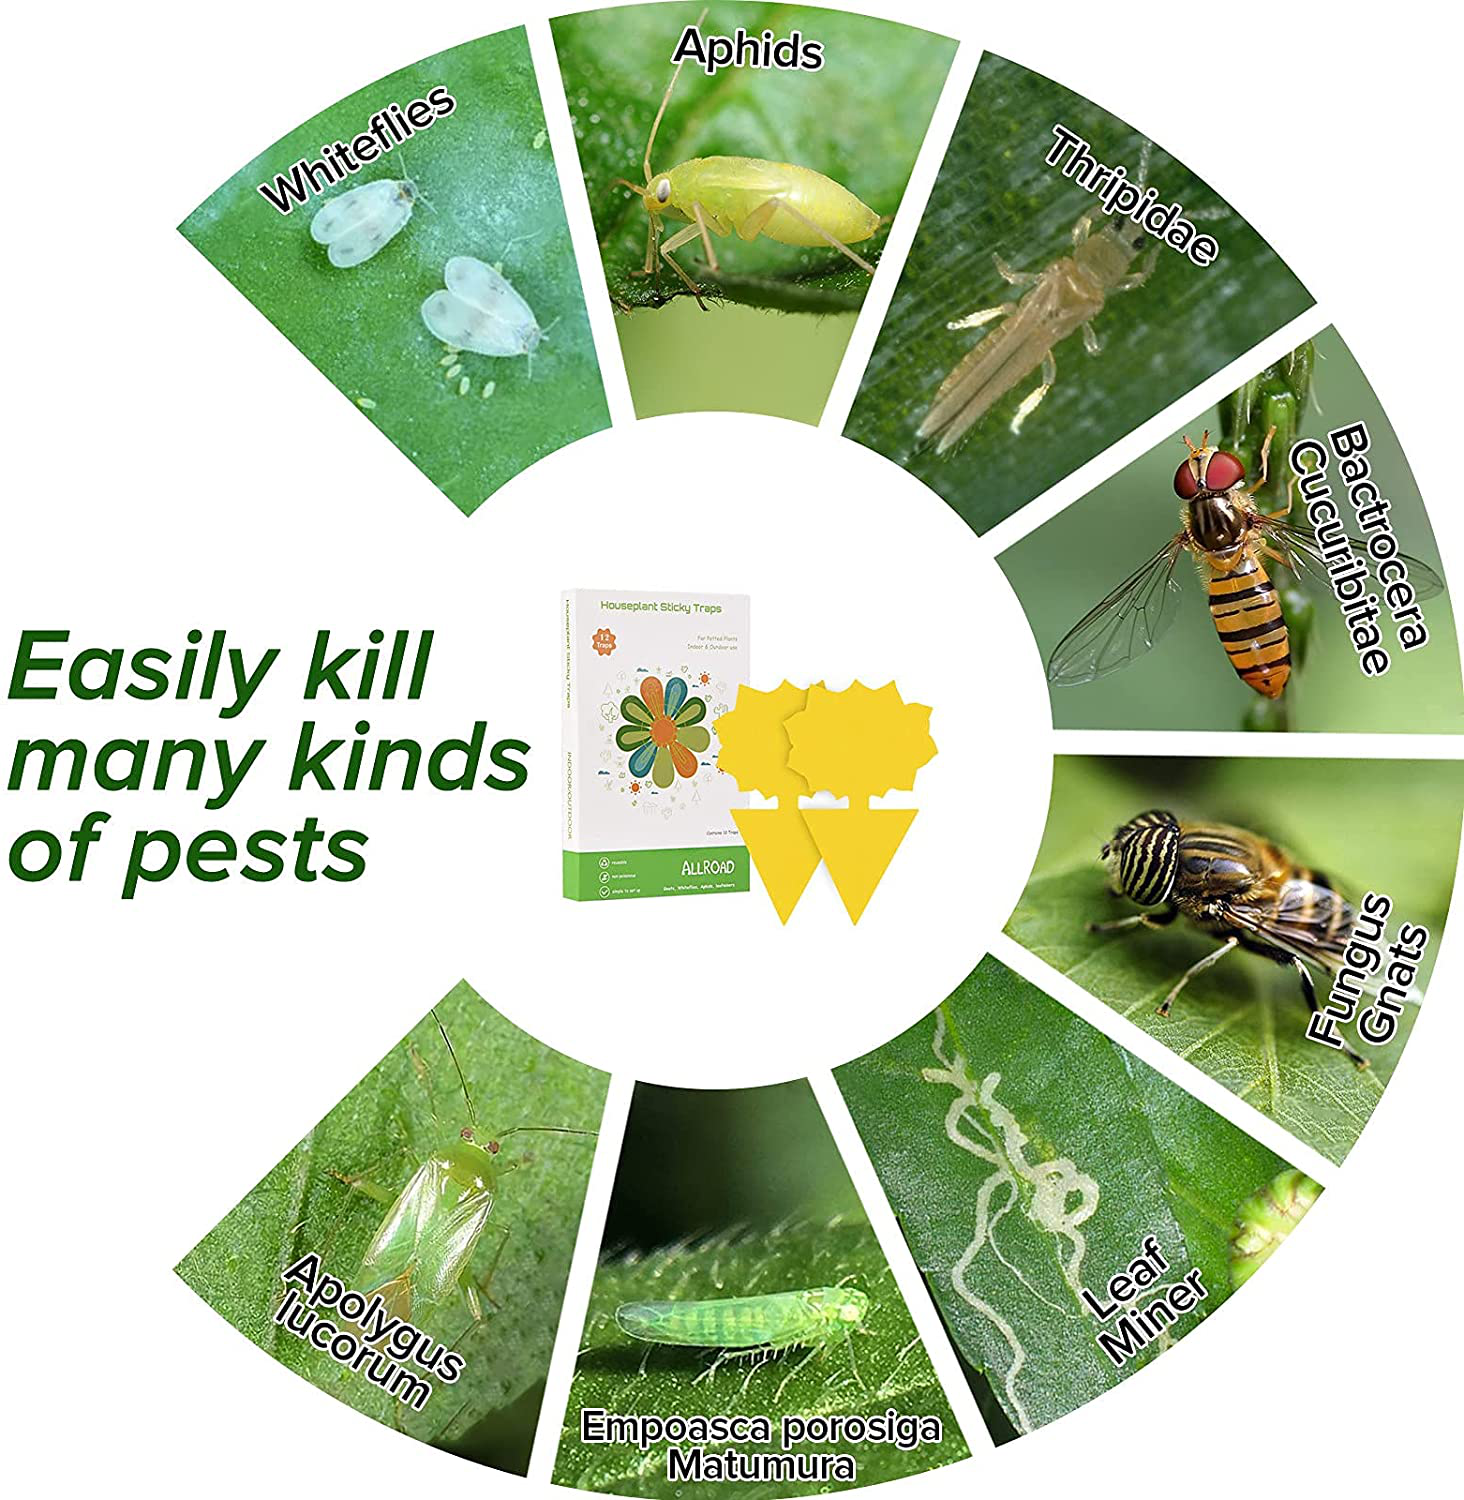 ALLRoad 12 Pcs Yellow Sticky Trap Fruit Fly Insect Trap Fungus Gnat Killer for Indoor and Outdoor Plant Insect Catcher for White Flies,Mosquitoes,Fungus Gnats,Flying Insects